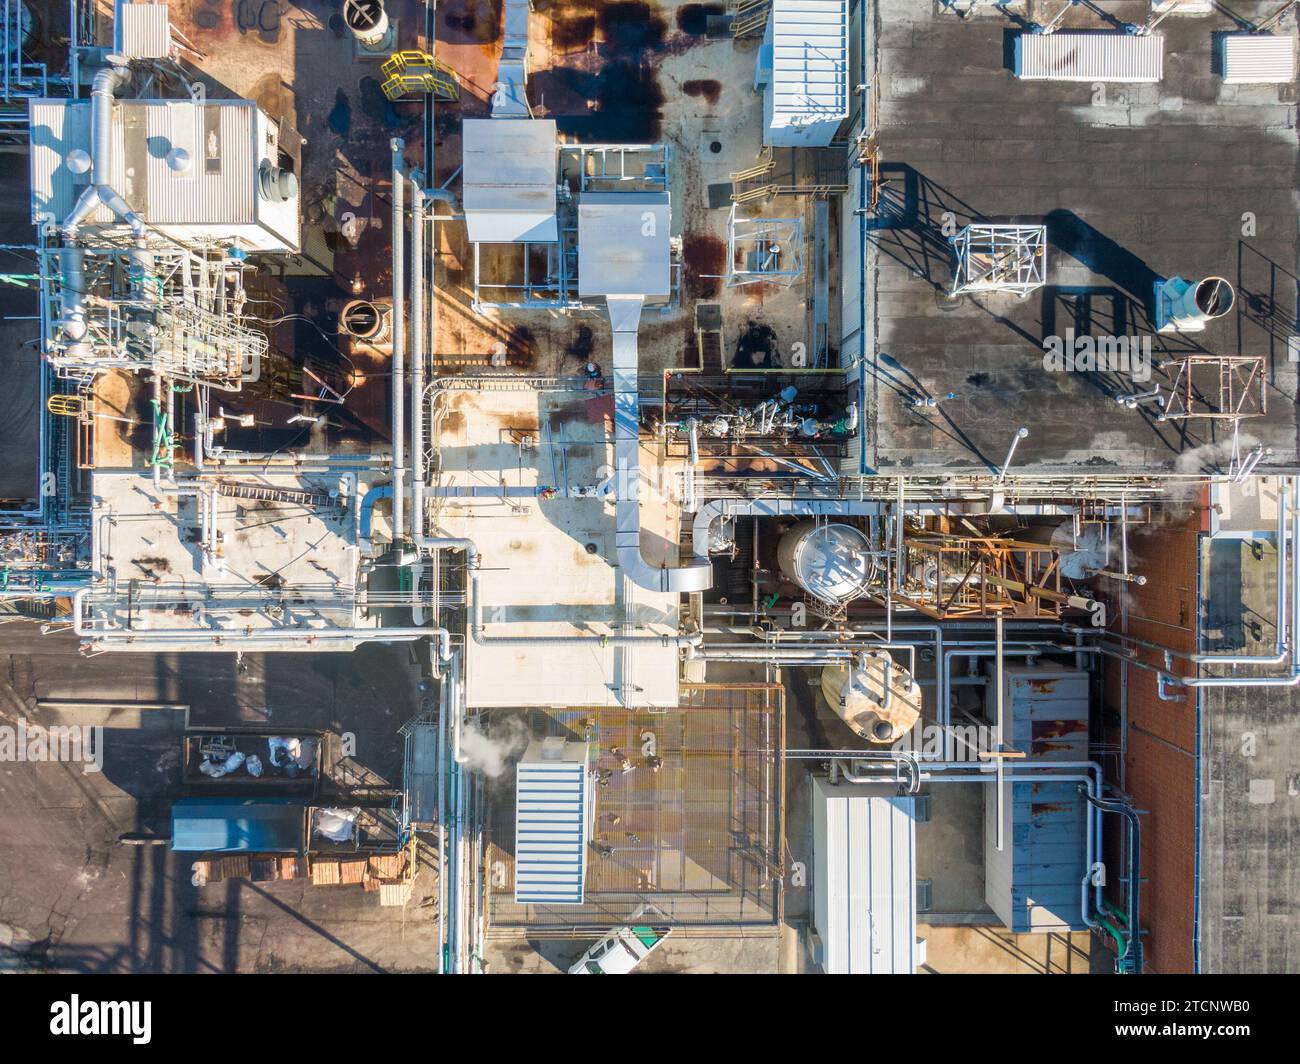 drone images of a large pharmaceutical manufacturing factory with lots of pipes, cool angles, and interesting shadows. Stock Photo